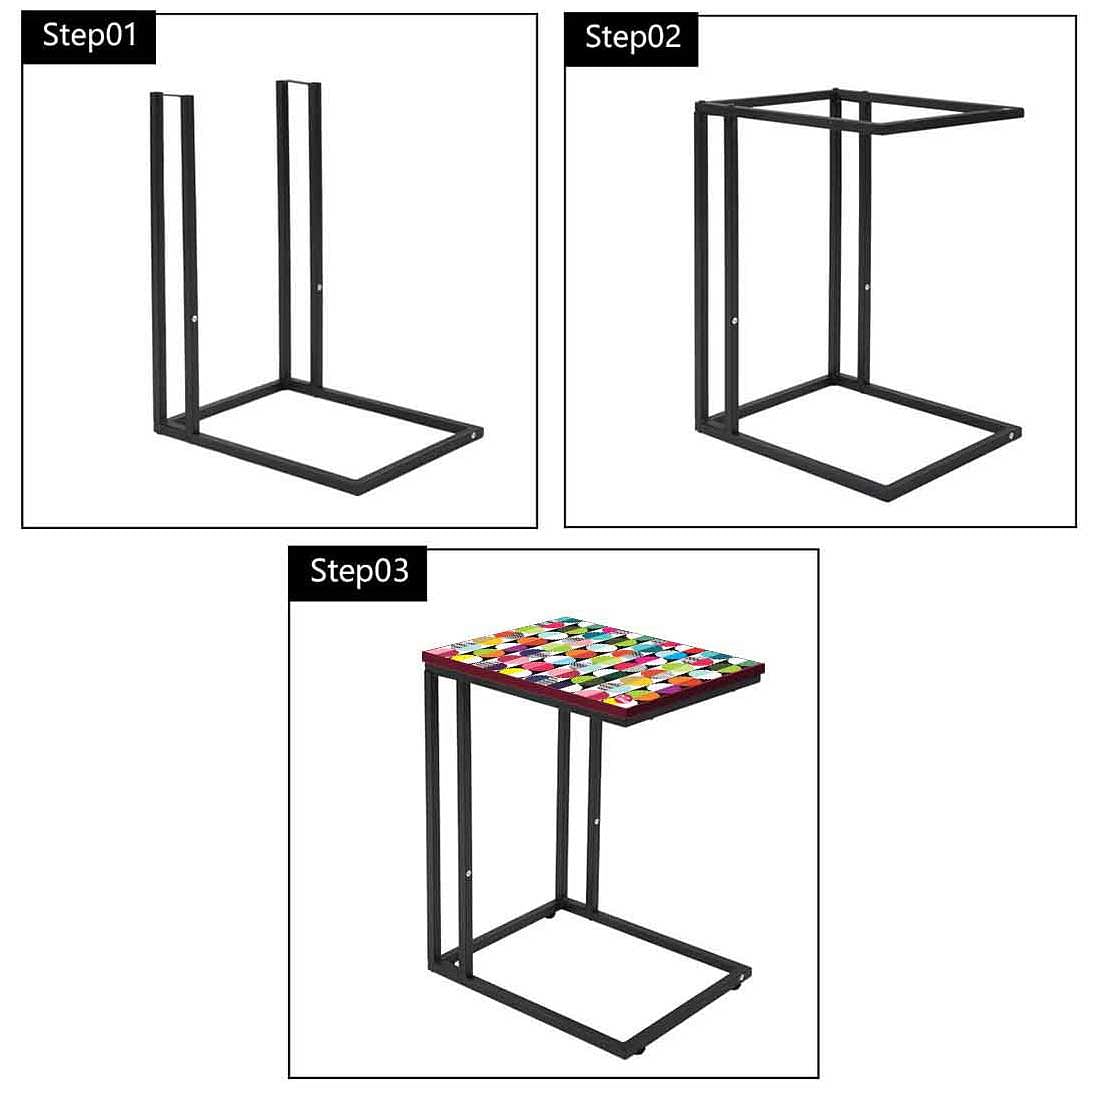 C Shaped Side Table For Sofa - Colorful Circle Pattern Nutcase